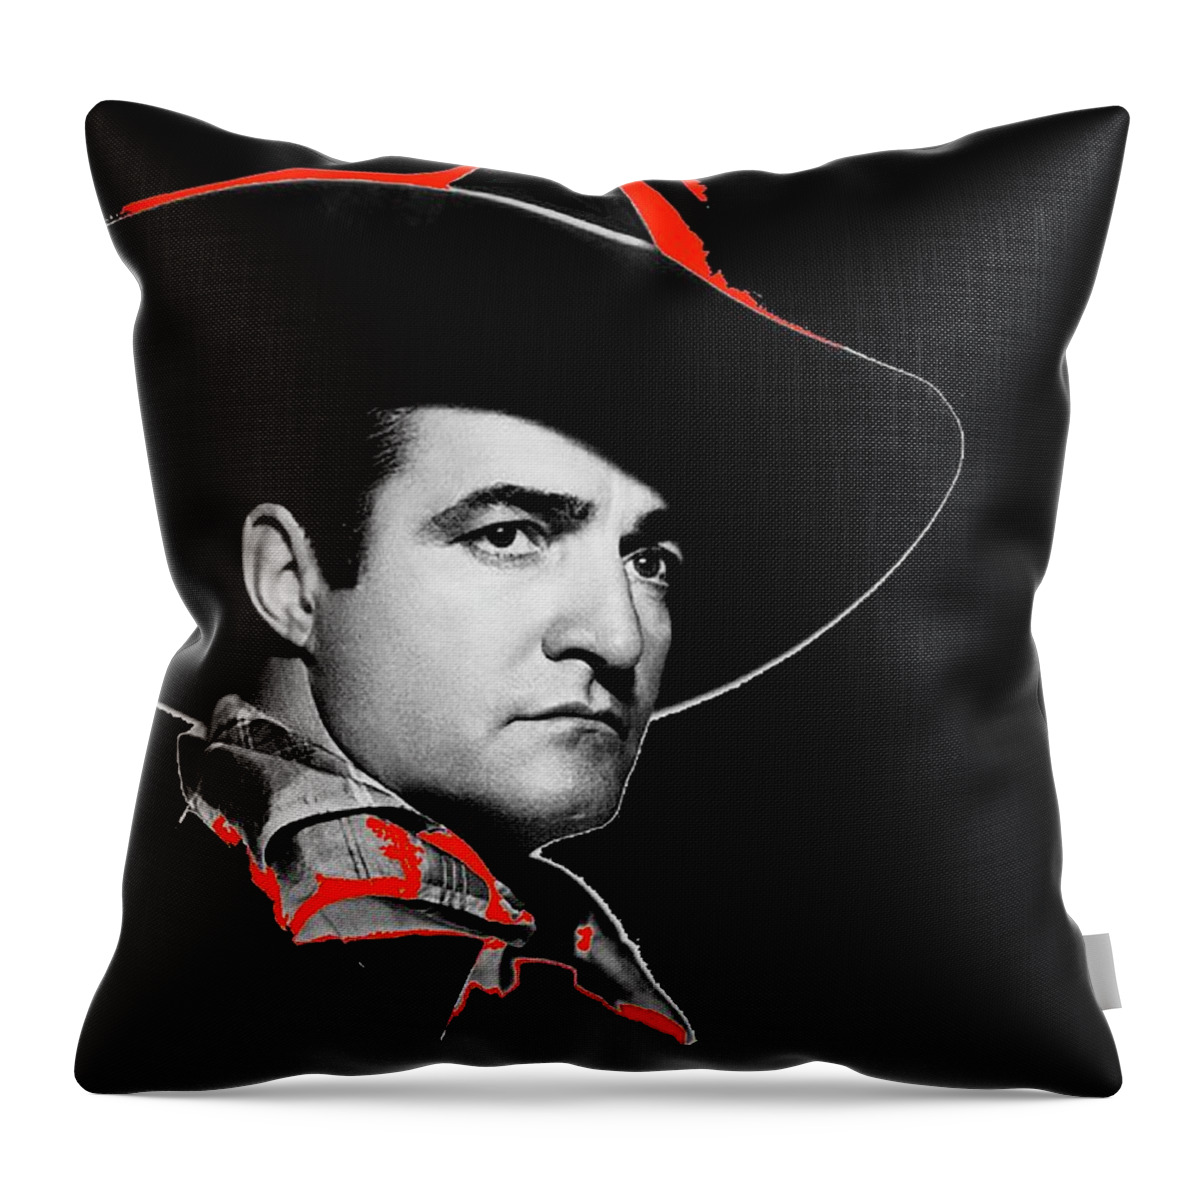 Tom Mix Portrait C.1925 Color Added 2013 Throw Pillow featuring the photograph Tom Mix Portrait C.1925 color added 2013 by David Lee Guss